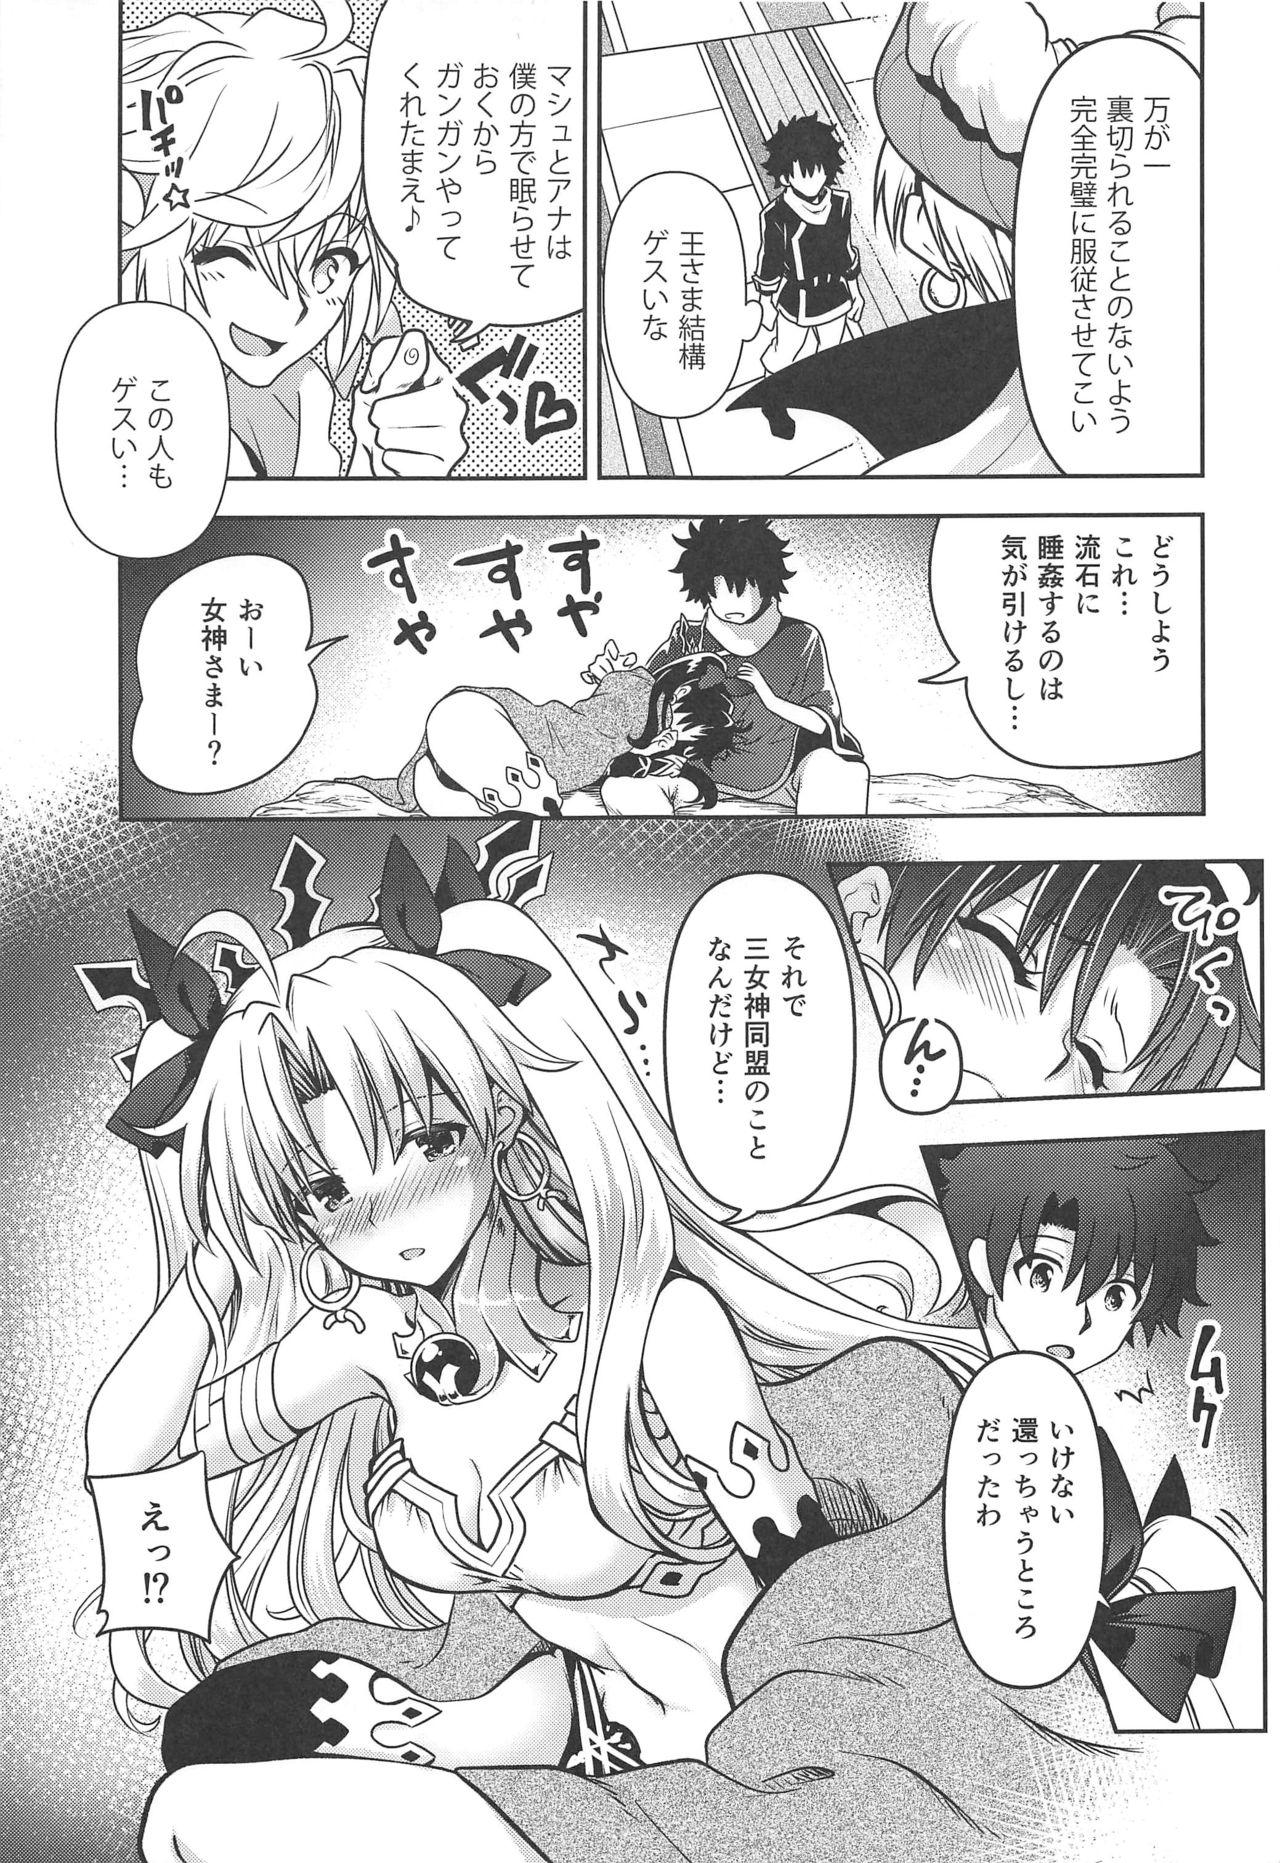 Caiu Na Net All Night Romance - Fate grand order Staxxx - Page 4